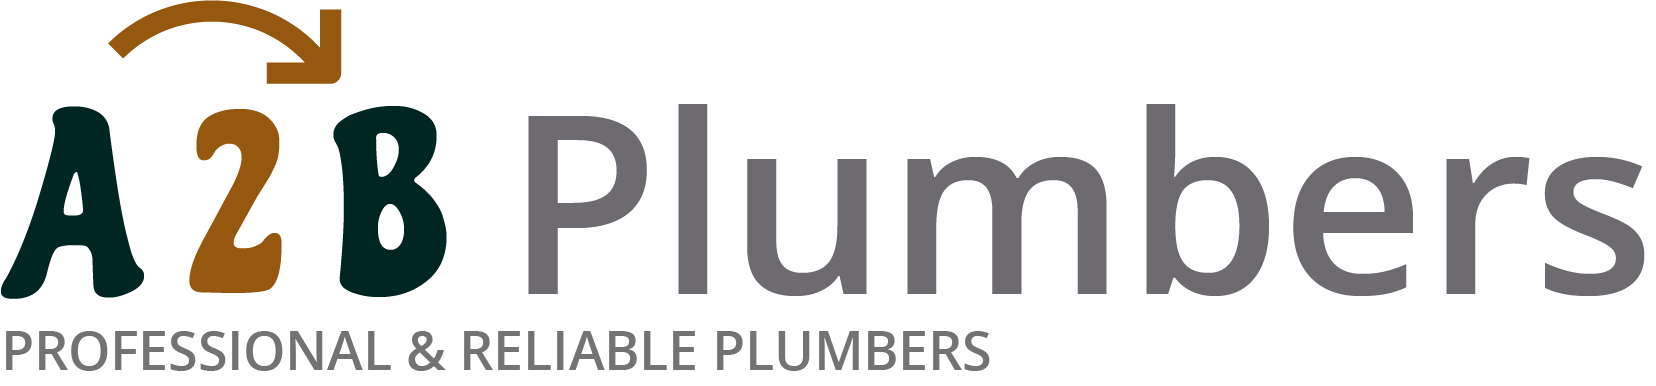 If you need a boiler installed, a radiator repaired or a leaking tap fixed, call us now - we provide services for properties in Newport Pagnell and the local area.